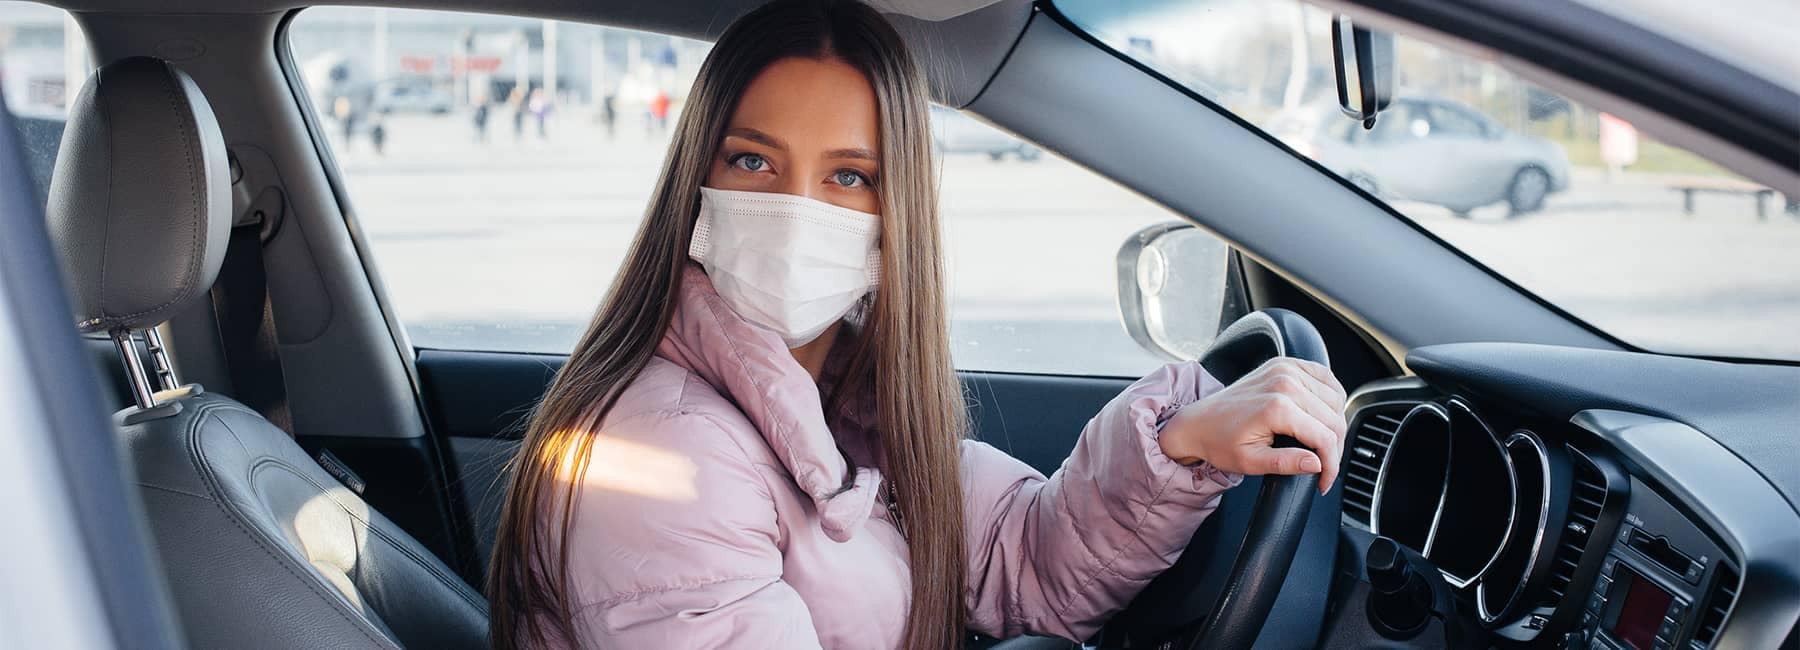 Woman in a Pink Coat Wearing a Mask and Driving a Chevy Vehicle